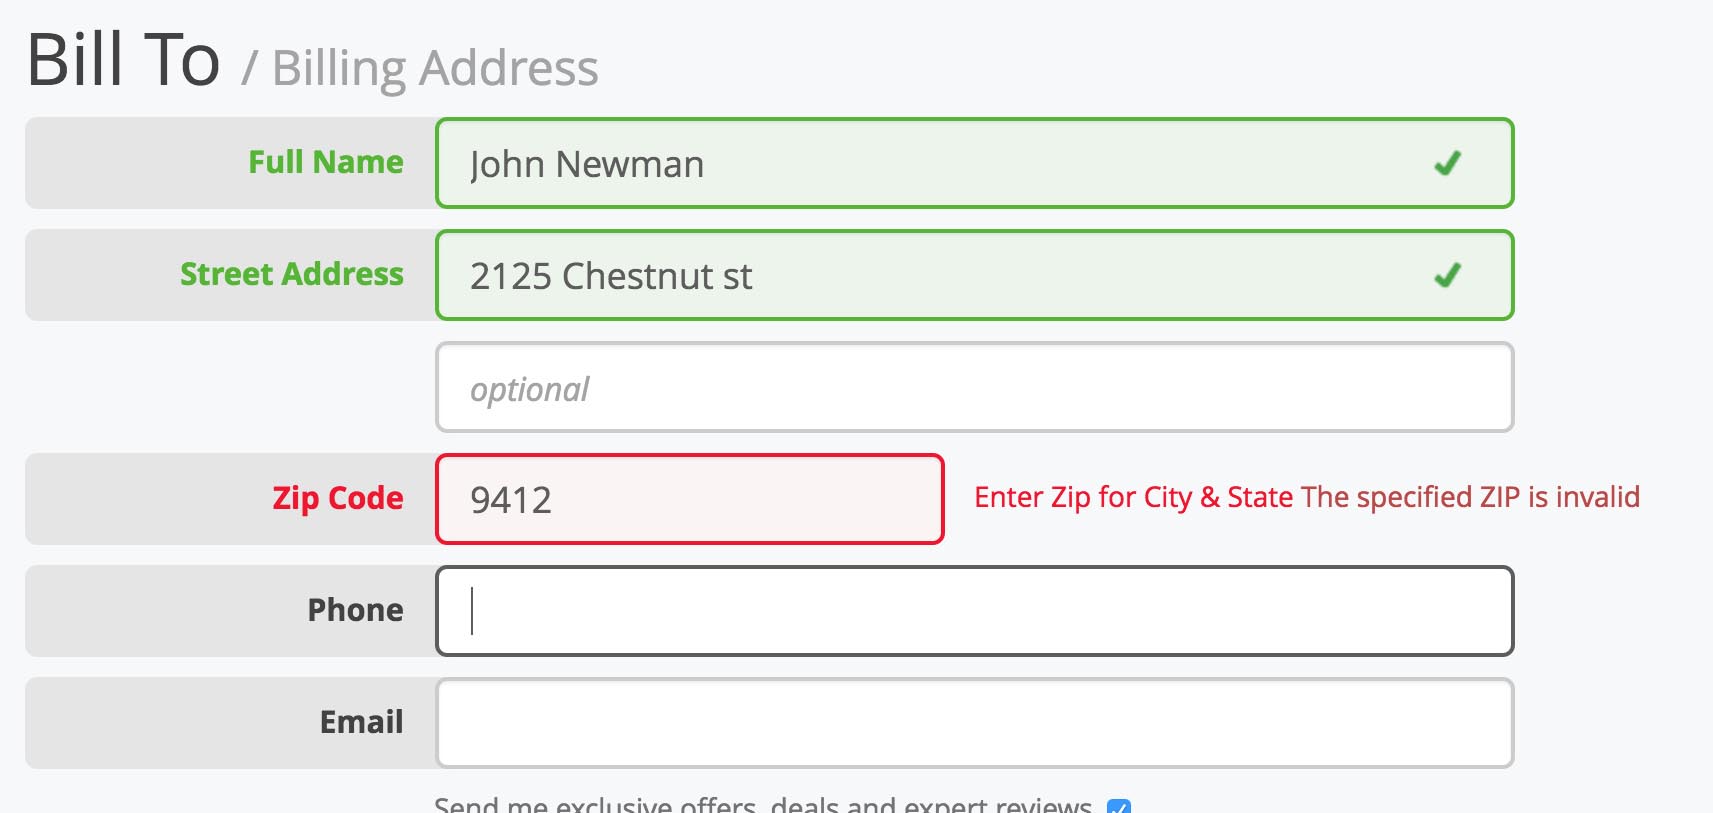 In a Bill to form, the name and address fields are highlighted in green and given checkmarks to show they are validated. The ZIP has only 4 digits so flags an error—the box is highlighted in red and some text is added to say it's invalid.